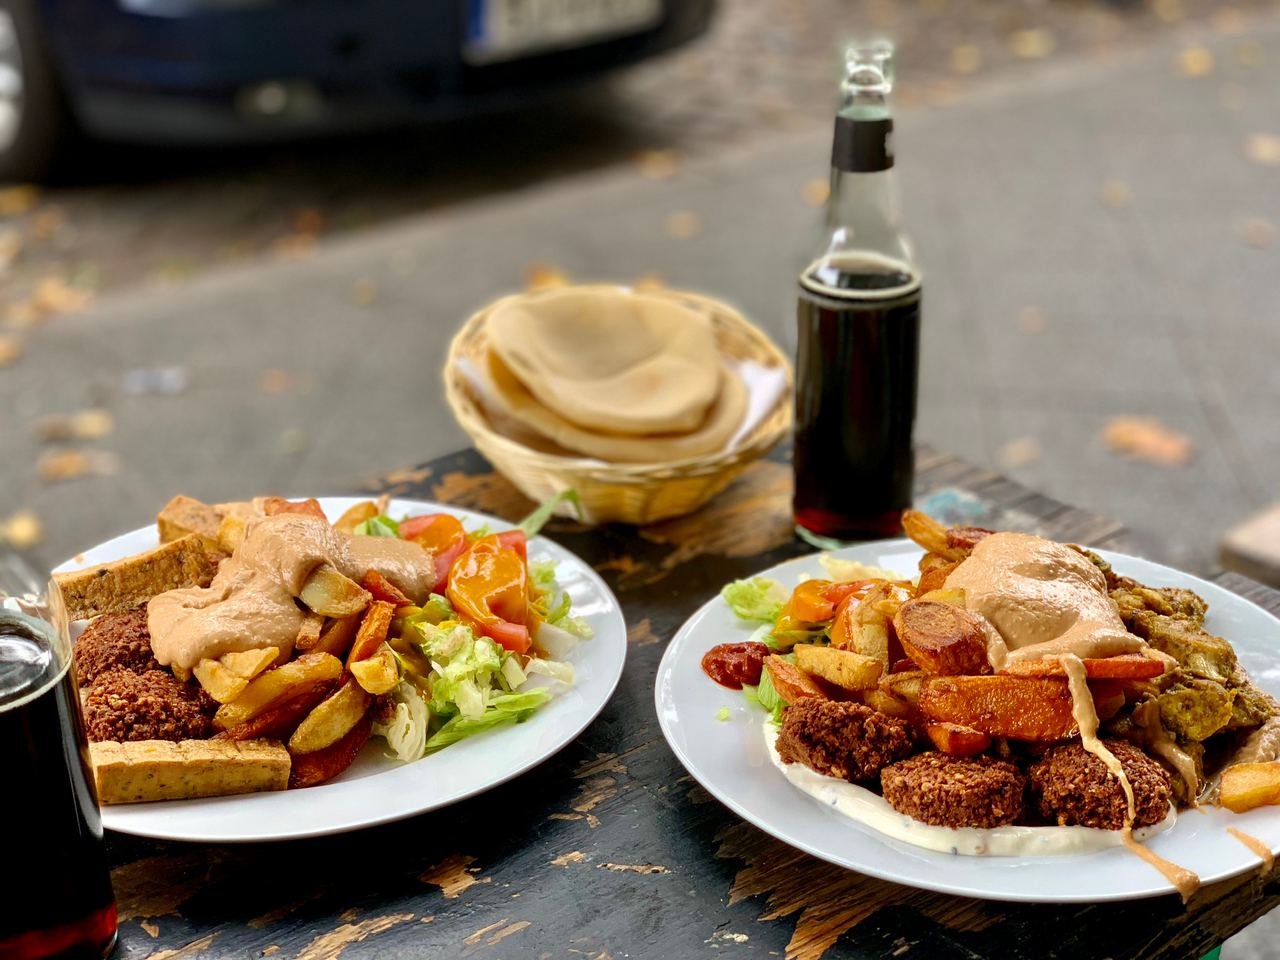 (Photo: Two white plates, each with falafel, halloumi and salad. In the background, round
Arabic bread and a bottle of Fritz-Kola.)